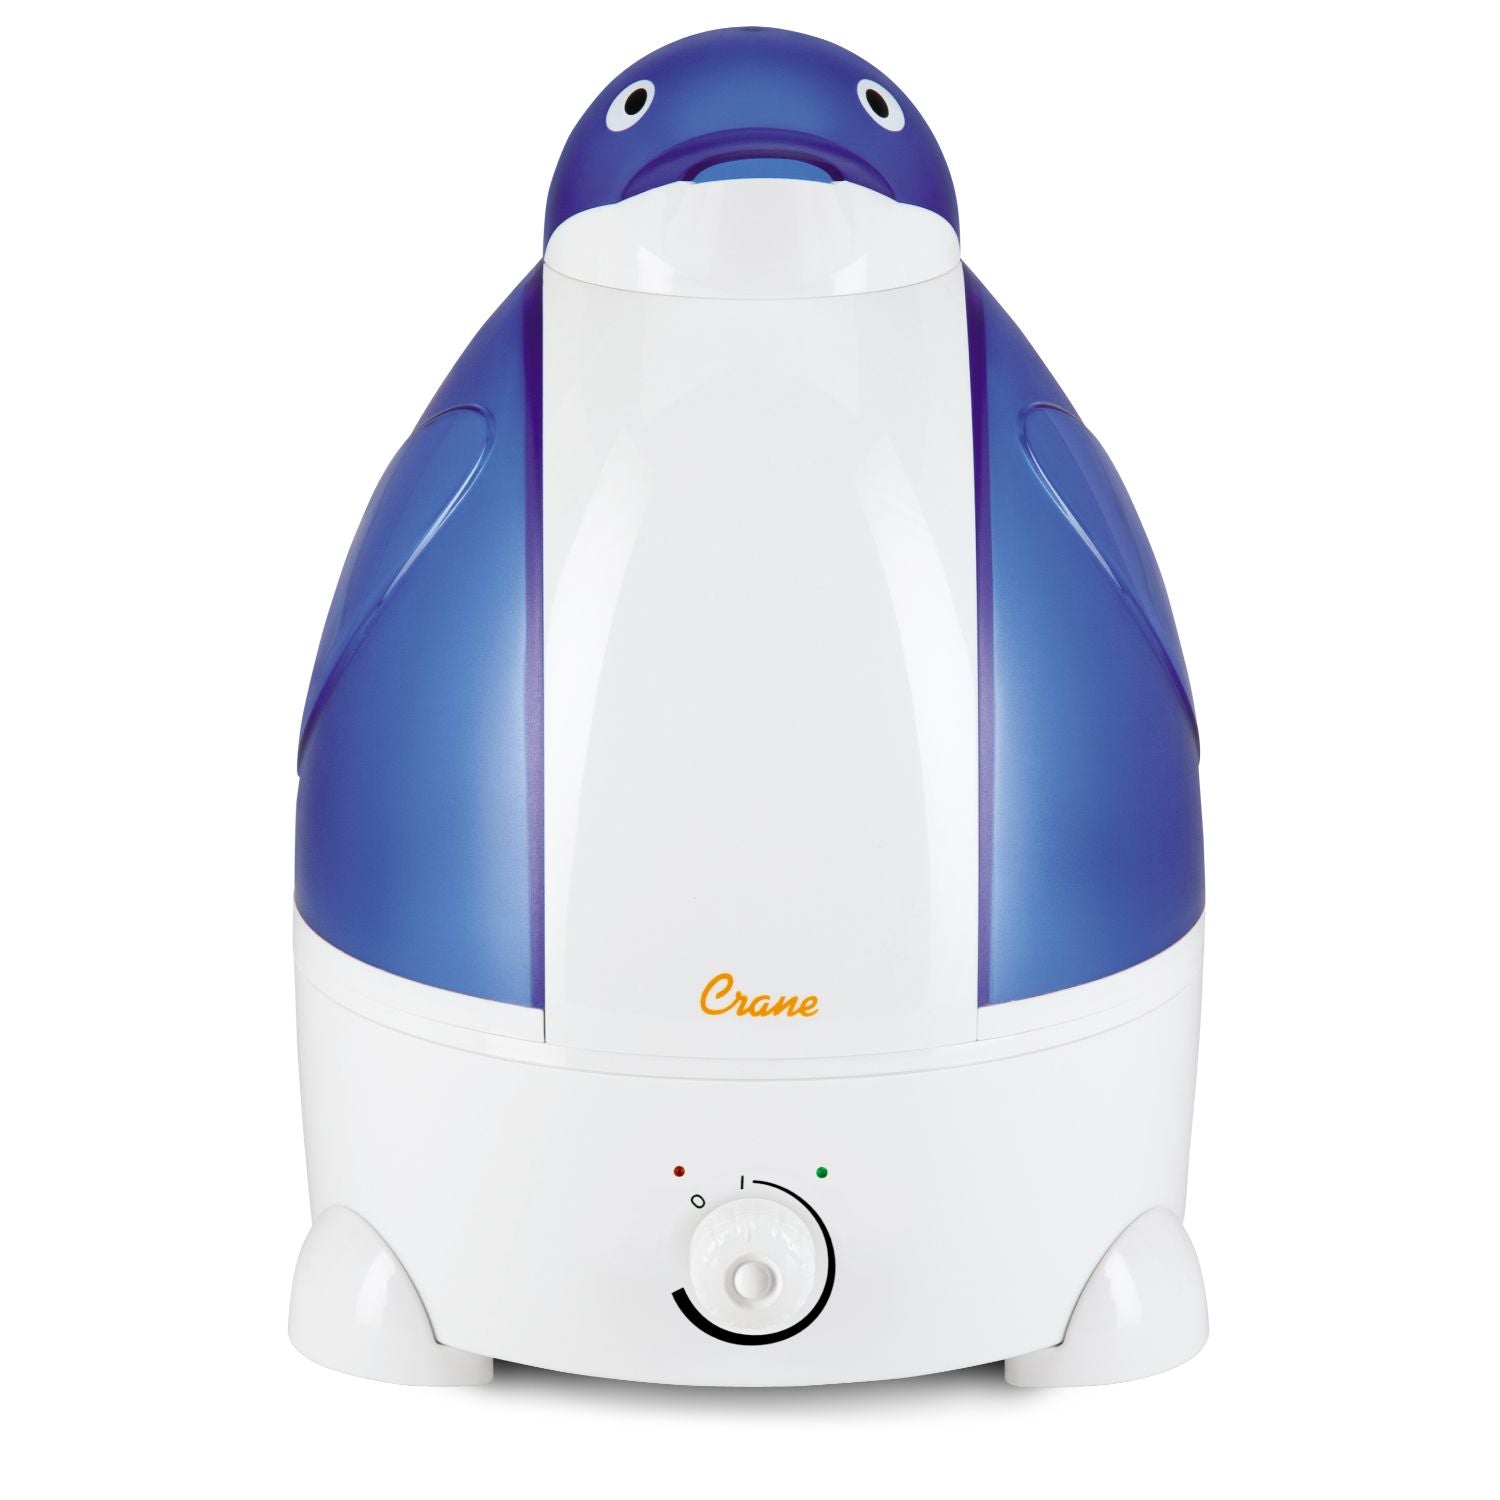 Crane Filter-Free Penguin Cool Mist Humidifiers